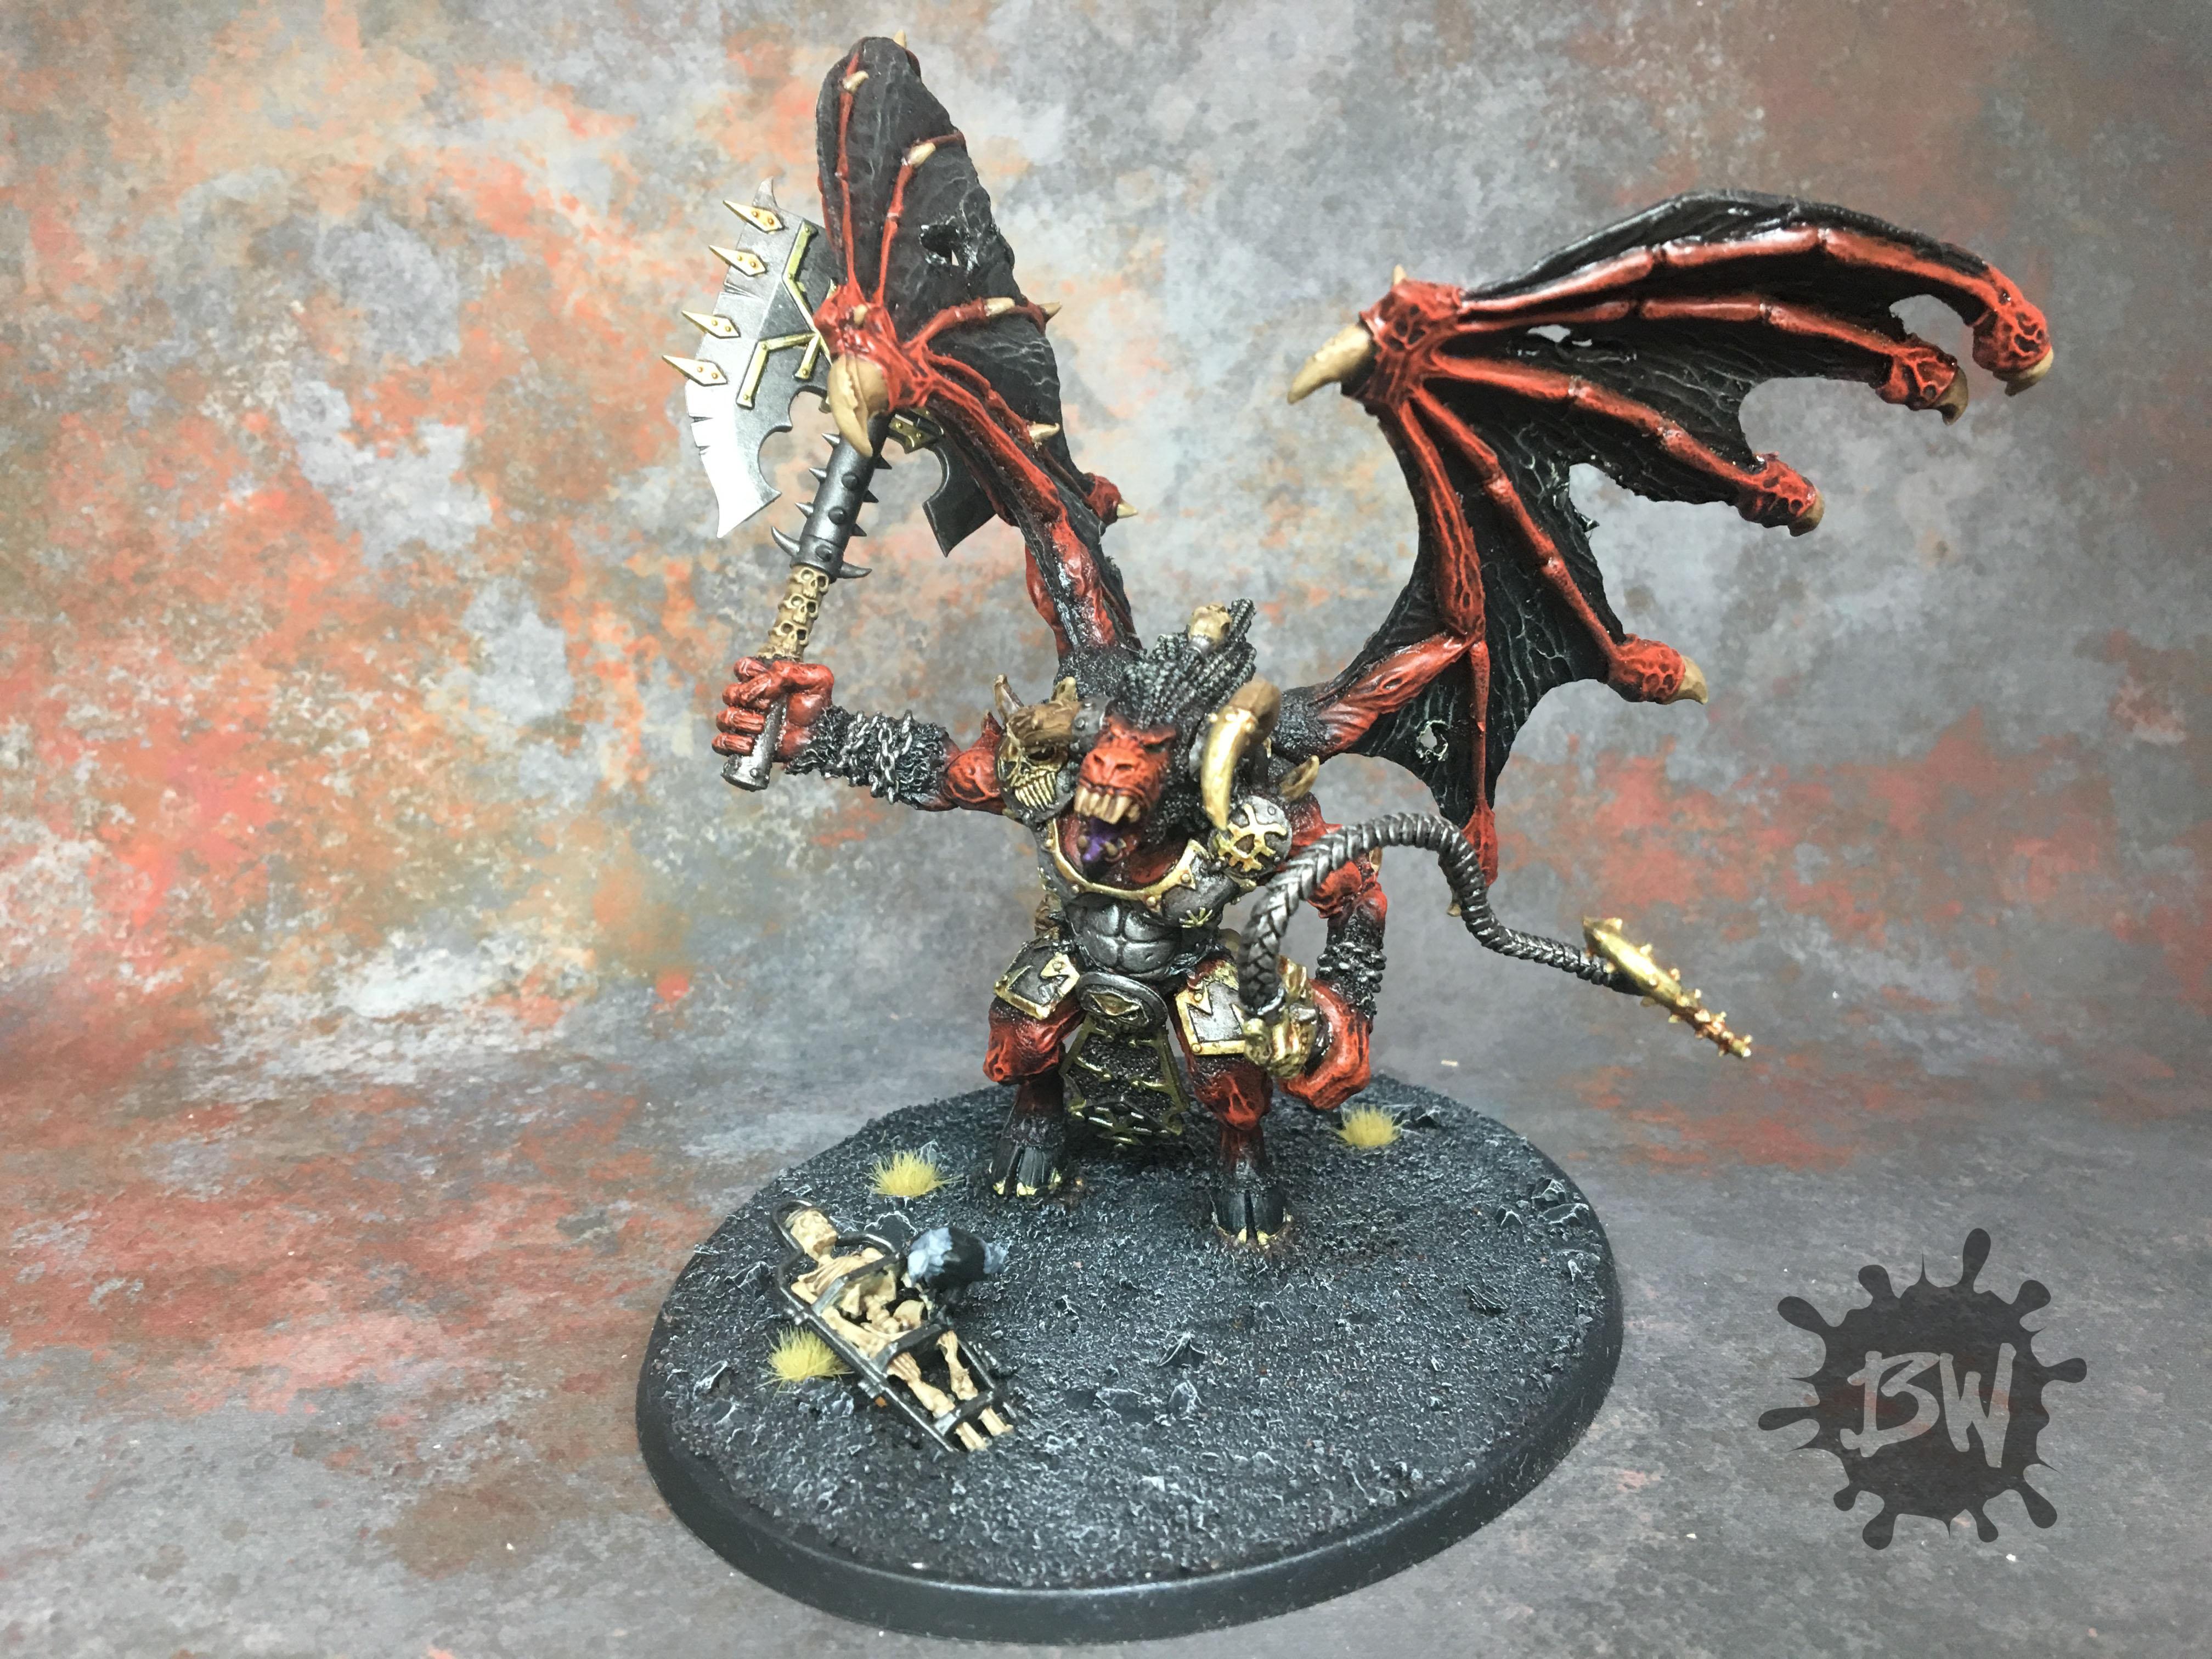 Age Of Sigmar, Bawpainting, Bloodthirster, Bloodthirster Of Unfettered Fury, Chaos, Commission, Daemons, Games Workshop, Khorne, Painting, Warhammer 40,000, Warhammer Fantasy, Wrath Of Khorne Bloodthirster